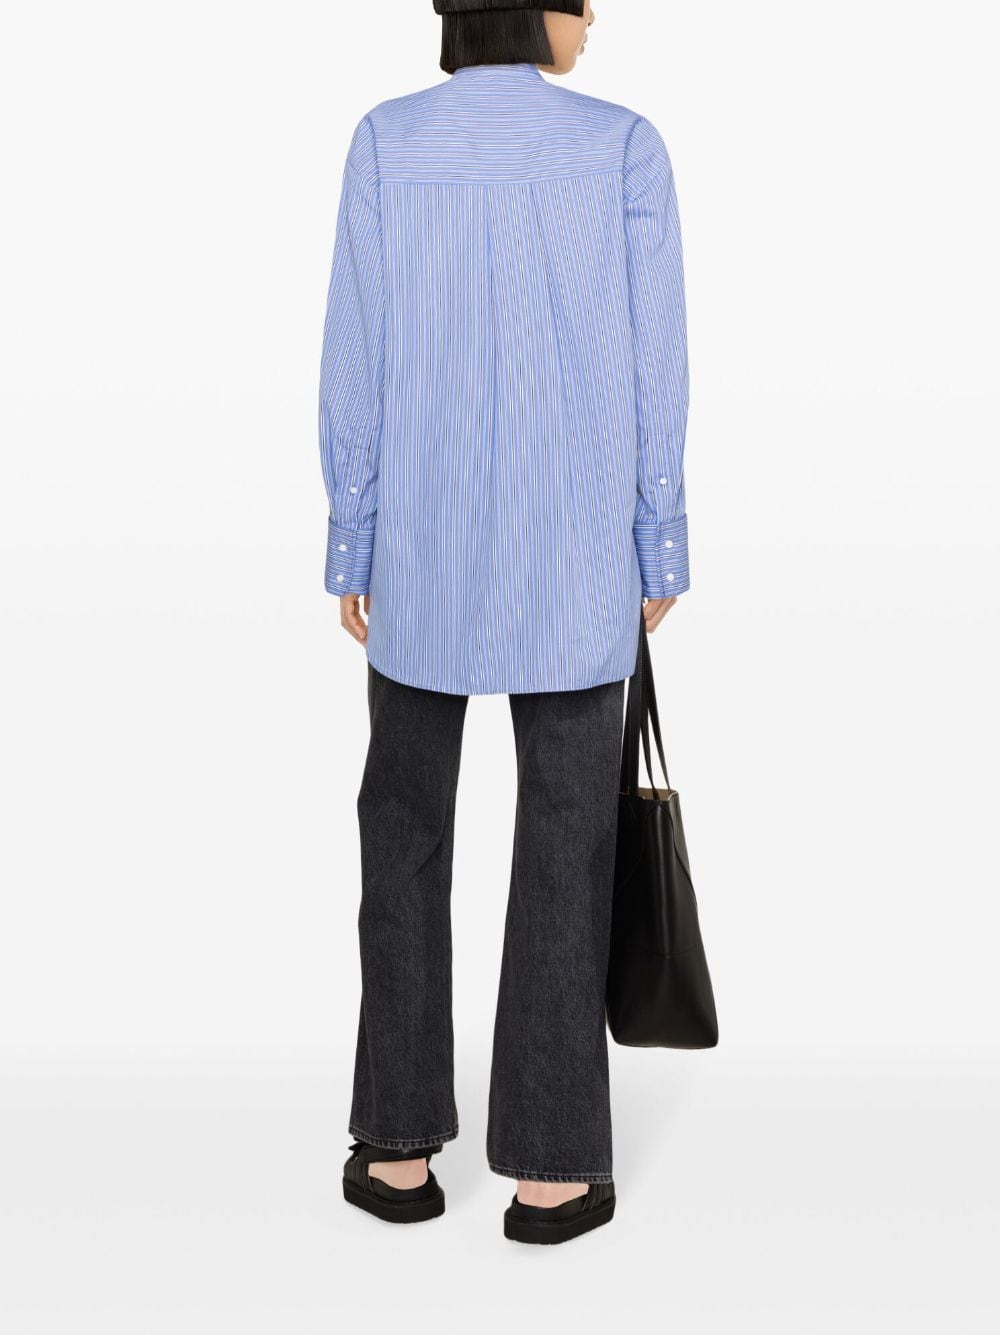 ISABEL MARANT Navy Striped Cotton Shirt for Women - SS24 Collection